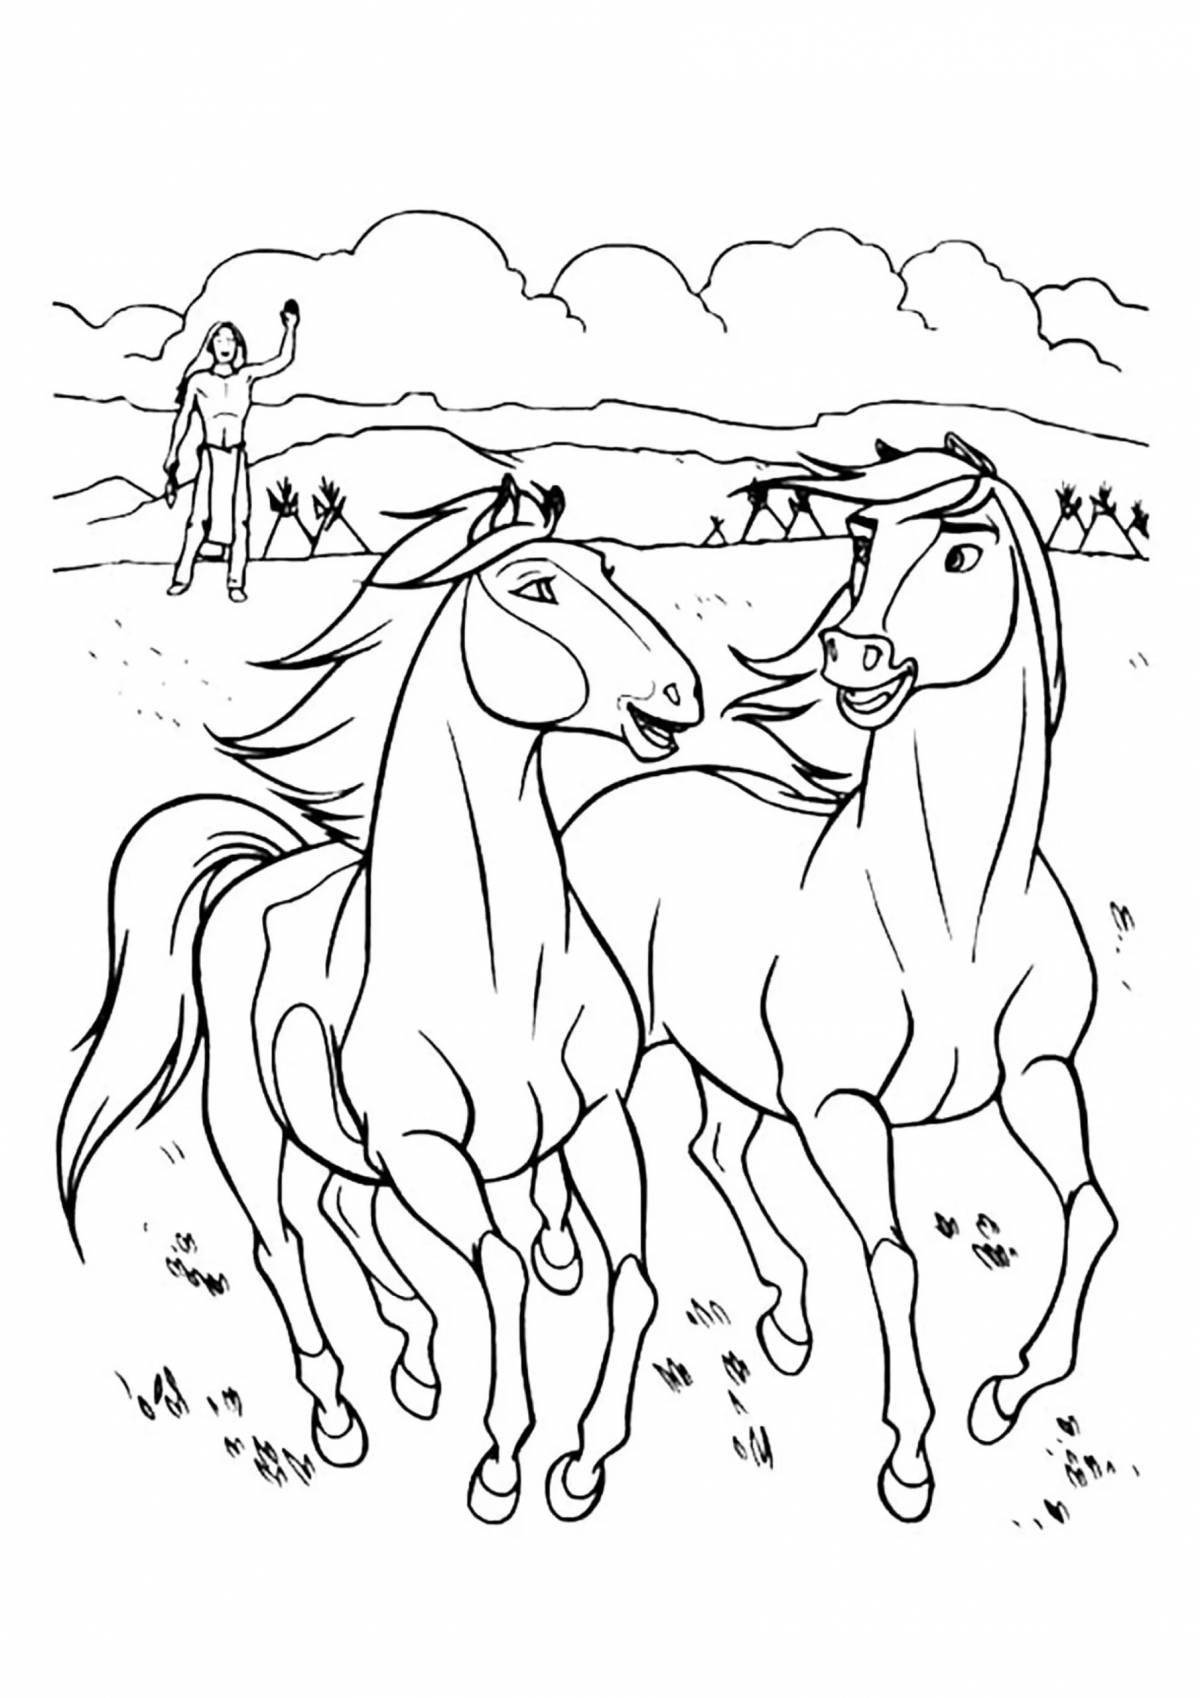 Adorable family of horses coloring book